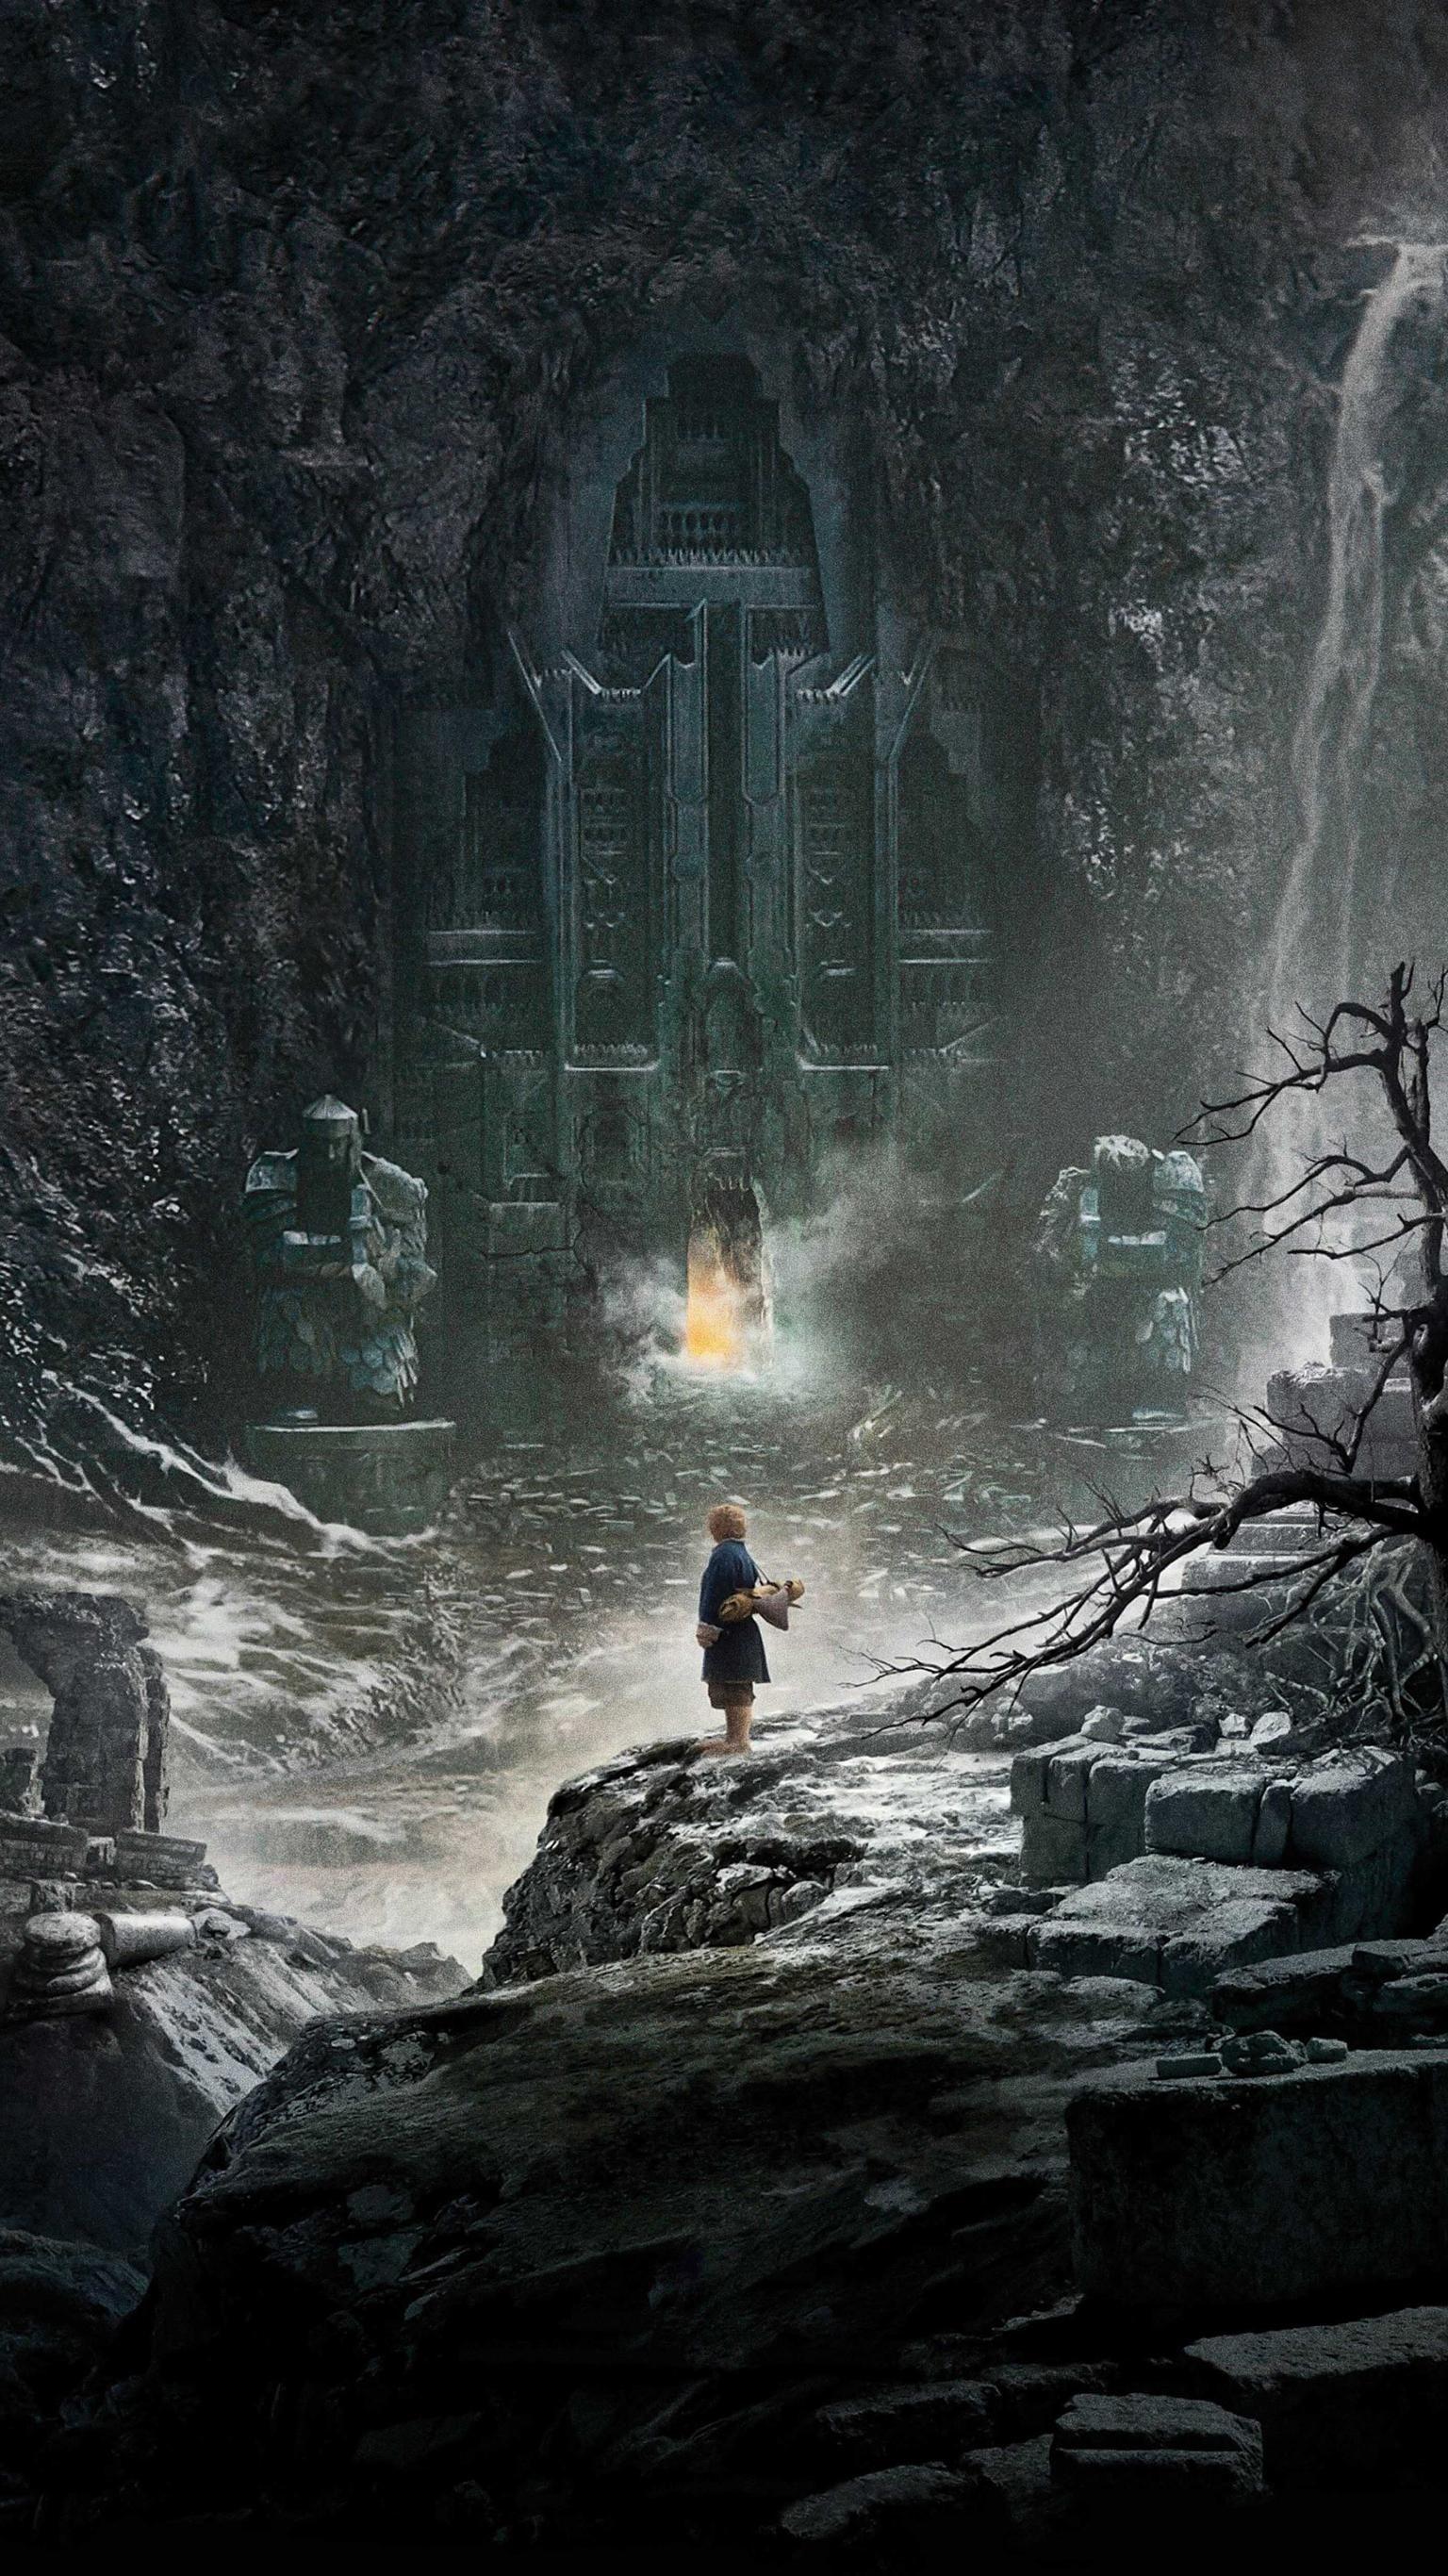 The Hobbit: The Desolation of Smaug (2013) Phone Wallpaper